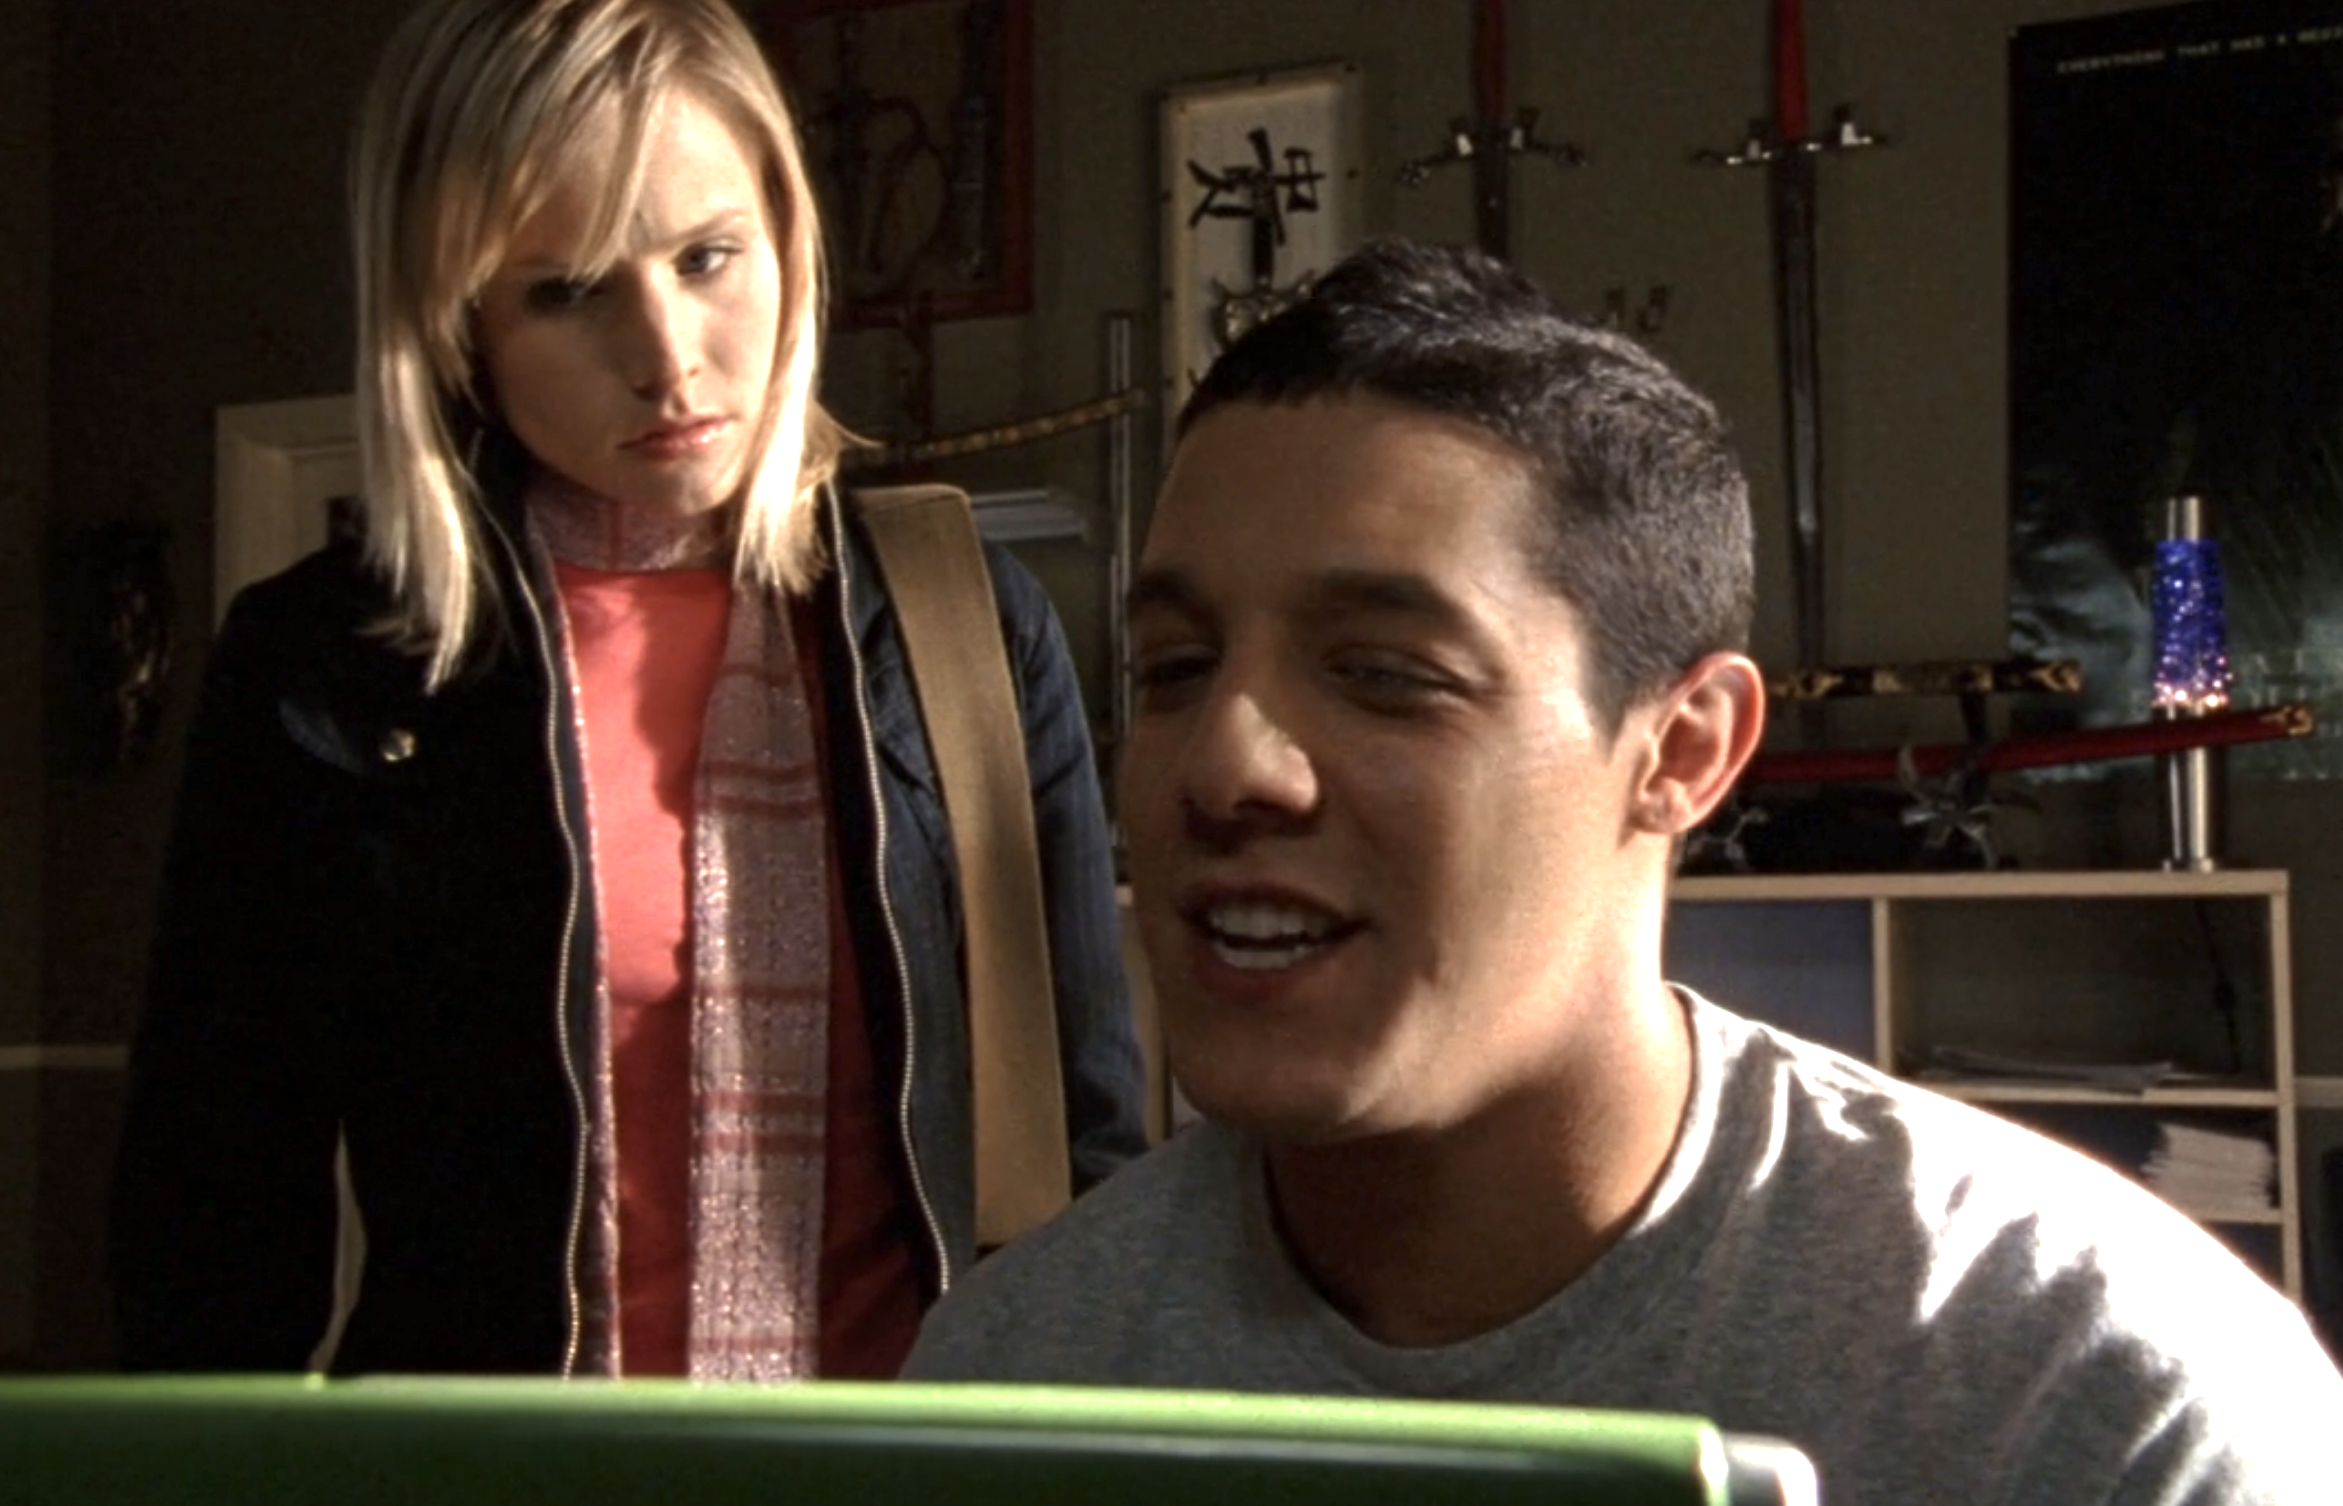 Screenshot from Veronica Mars S1E18. Norris is sitting at a computer looking at the screen. Veronica is standing behind him looking at the screen.